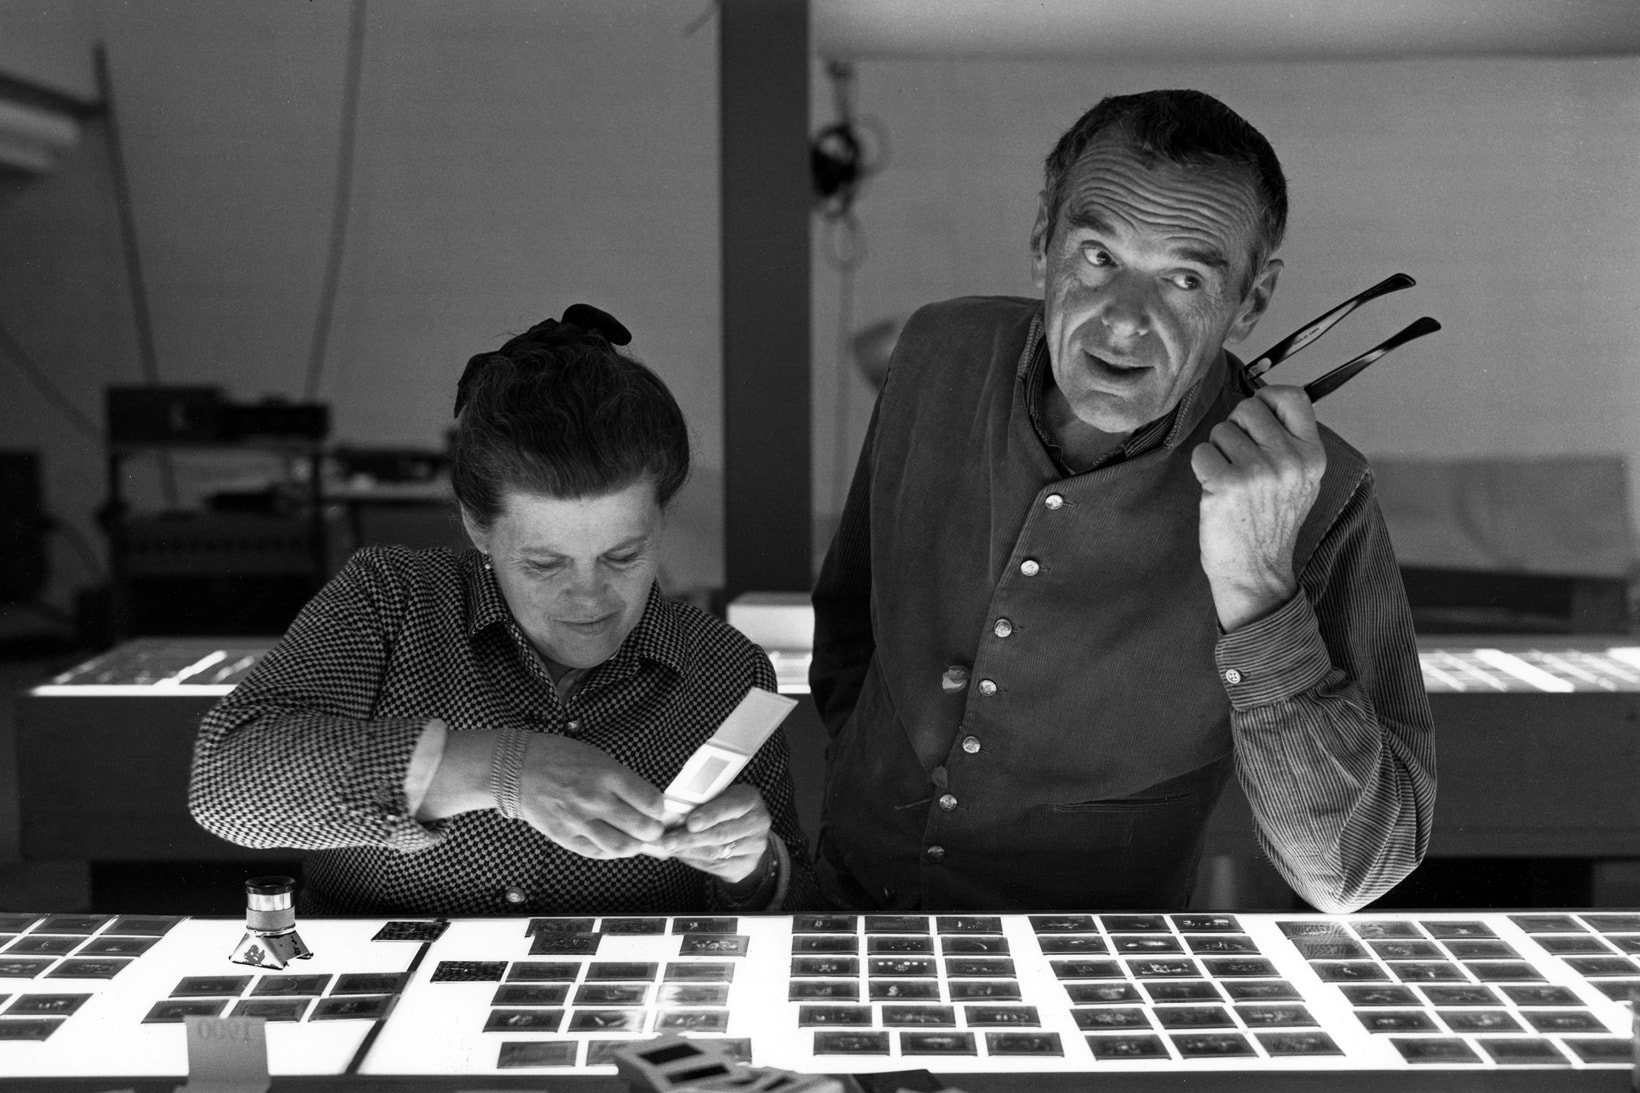 charles ray eames oakland museum of california barbican art gallery artworks installations photography prototypes films survey retrospective